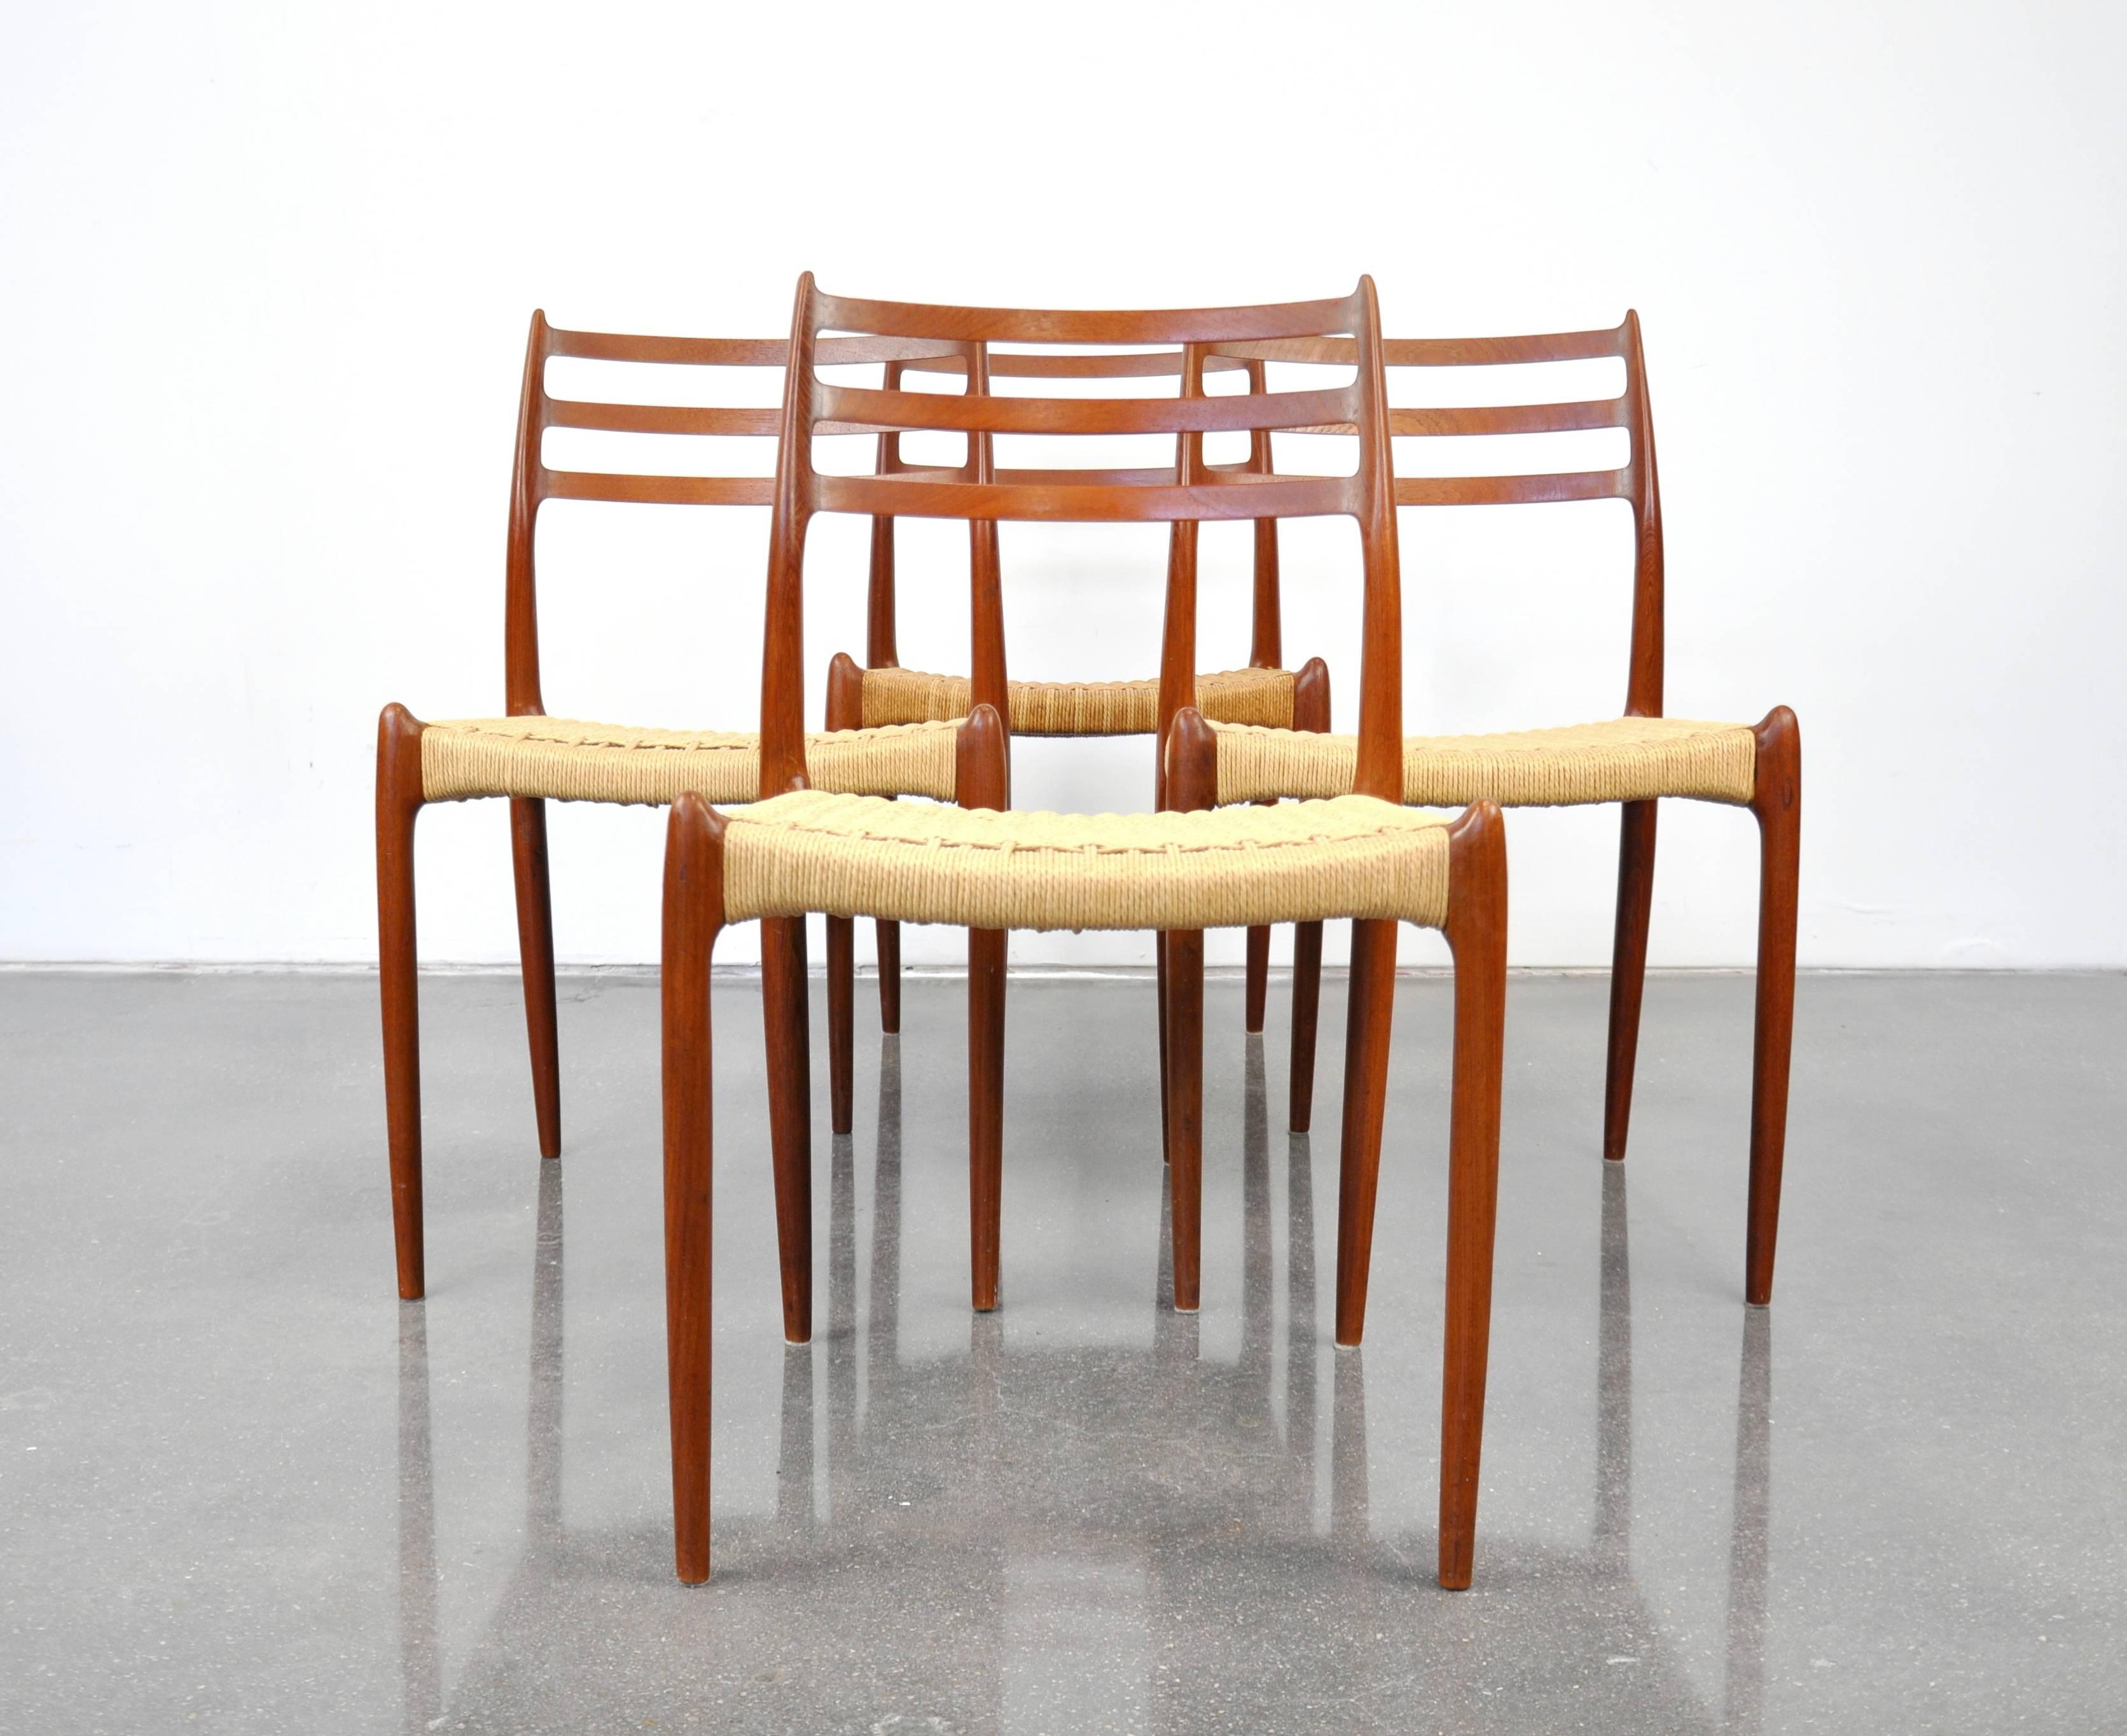 A vintage Mid-Century Modern teak dining set including a professionally restored draw-leaf extension dining table and a set of four model #78 chairs designed by Niels Otto Moller for J.L. Mollers Mobelfabrik in Denmark, dating from the 1960s. The